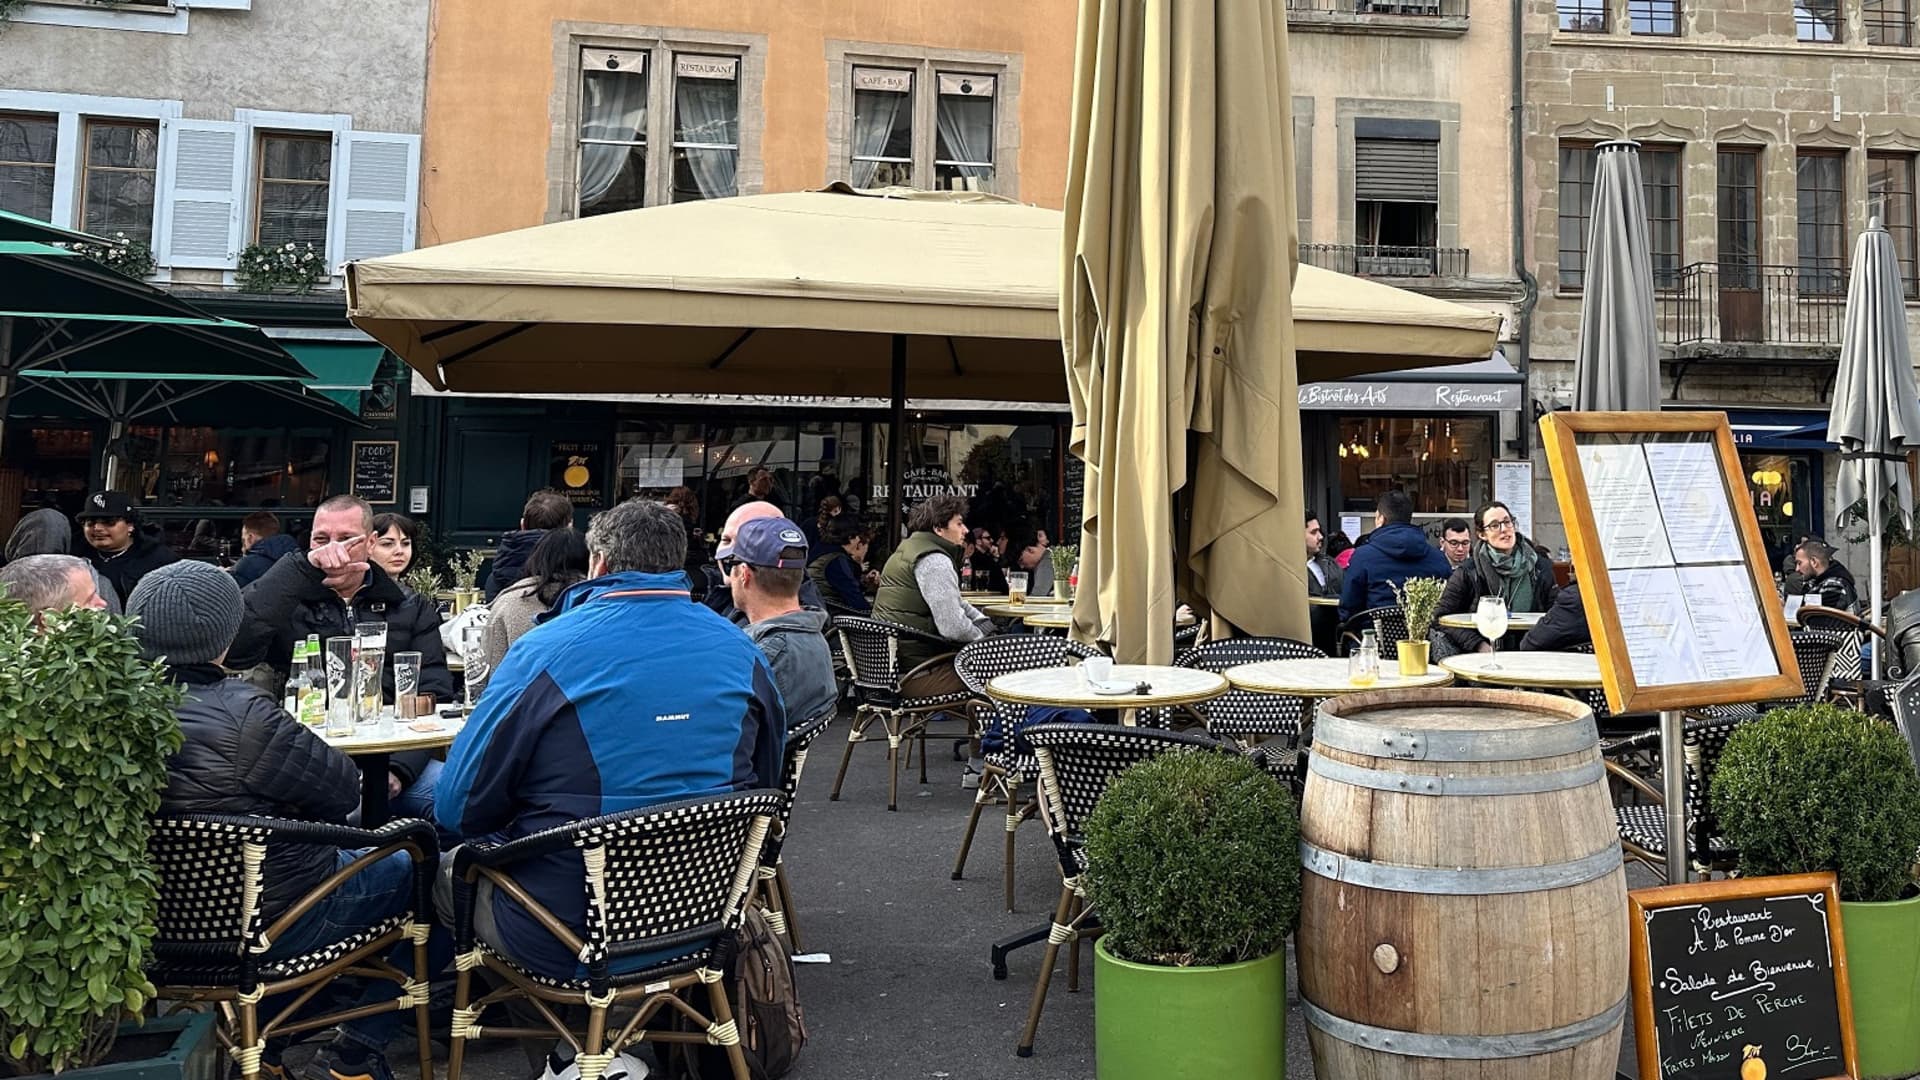 Geneva has a wonderful cafe culture, with many spots to enjoy a meal and people watch.